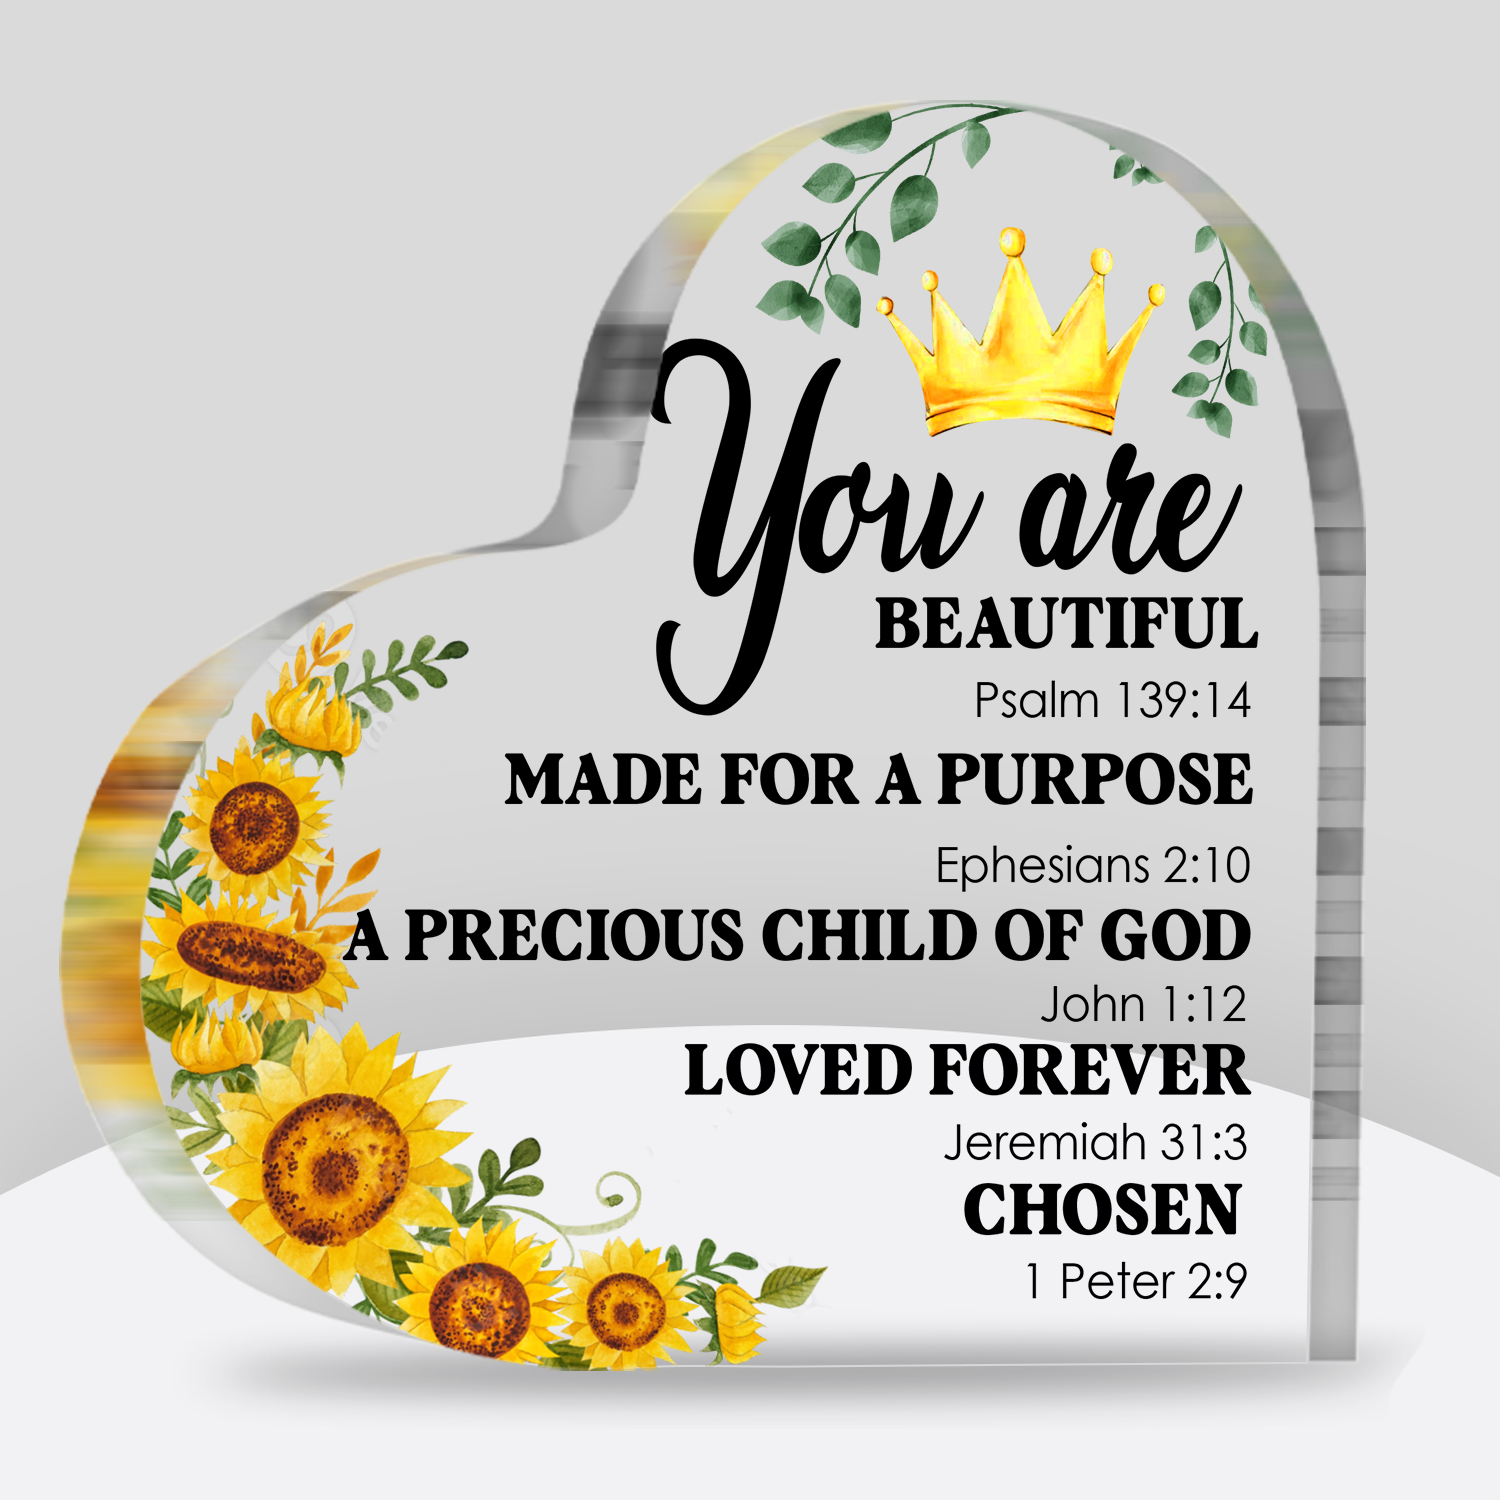 You Are Beautiful Heart Shaped Acrylic Plaque Christian Gifts Religious Gifts Inspirational Gifts with Bible Verse Prayers